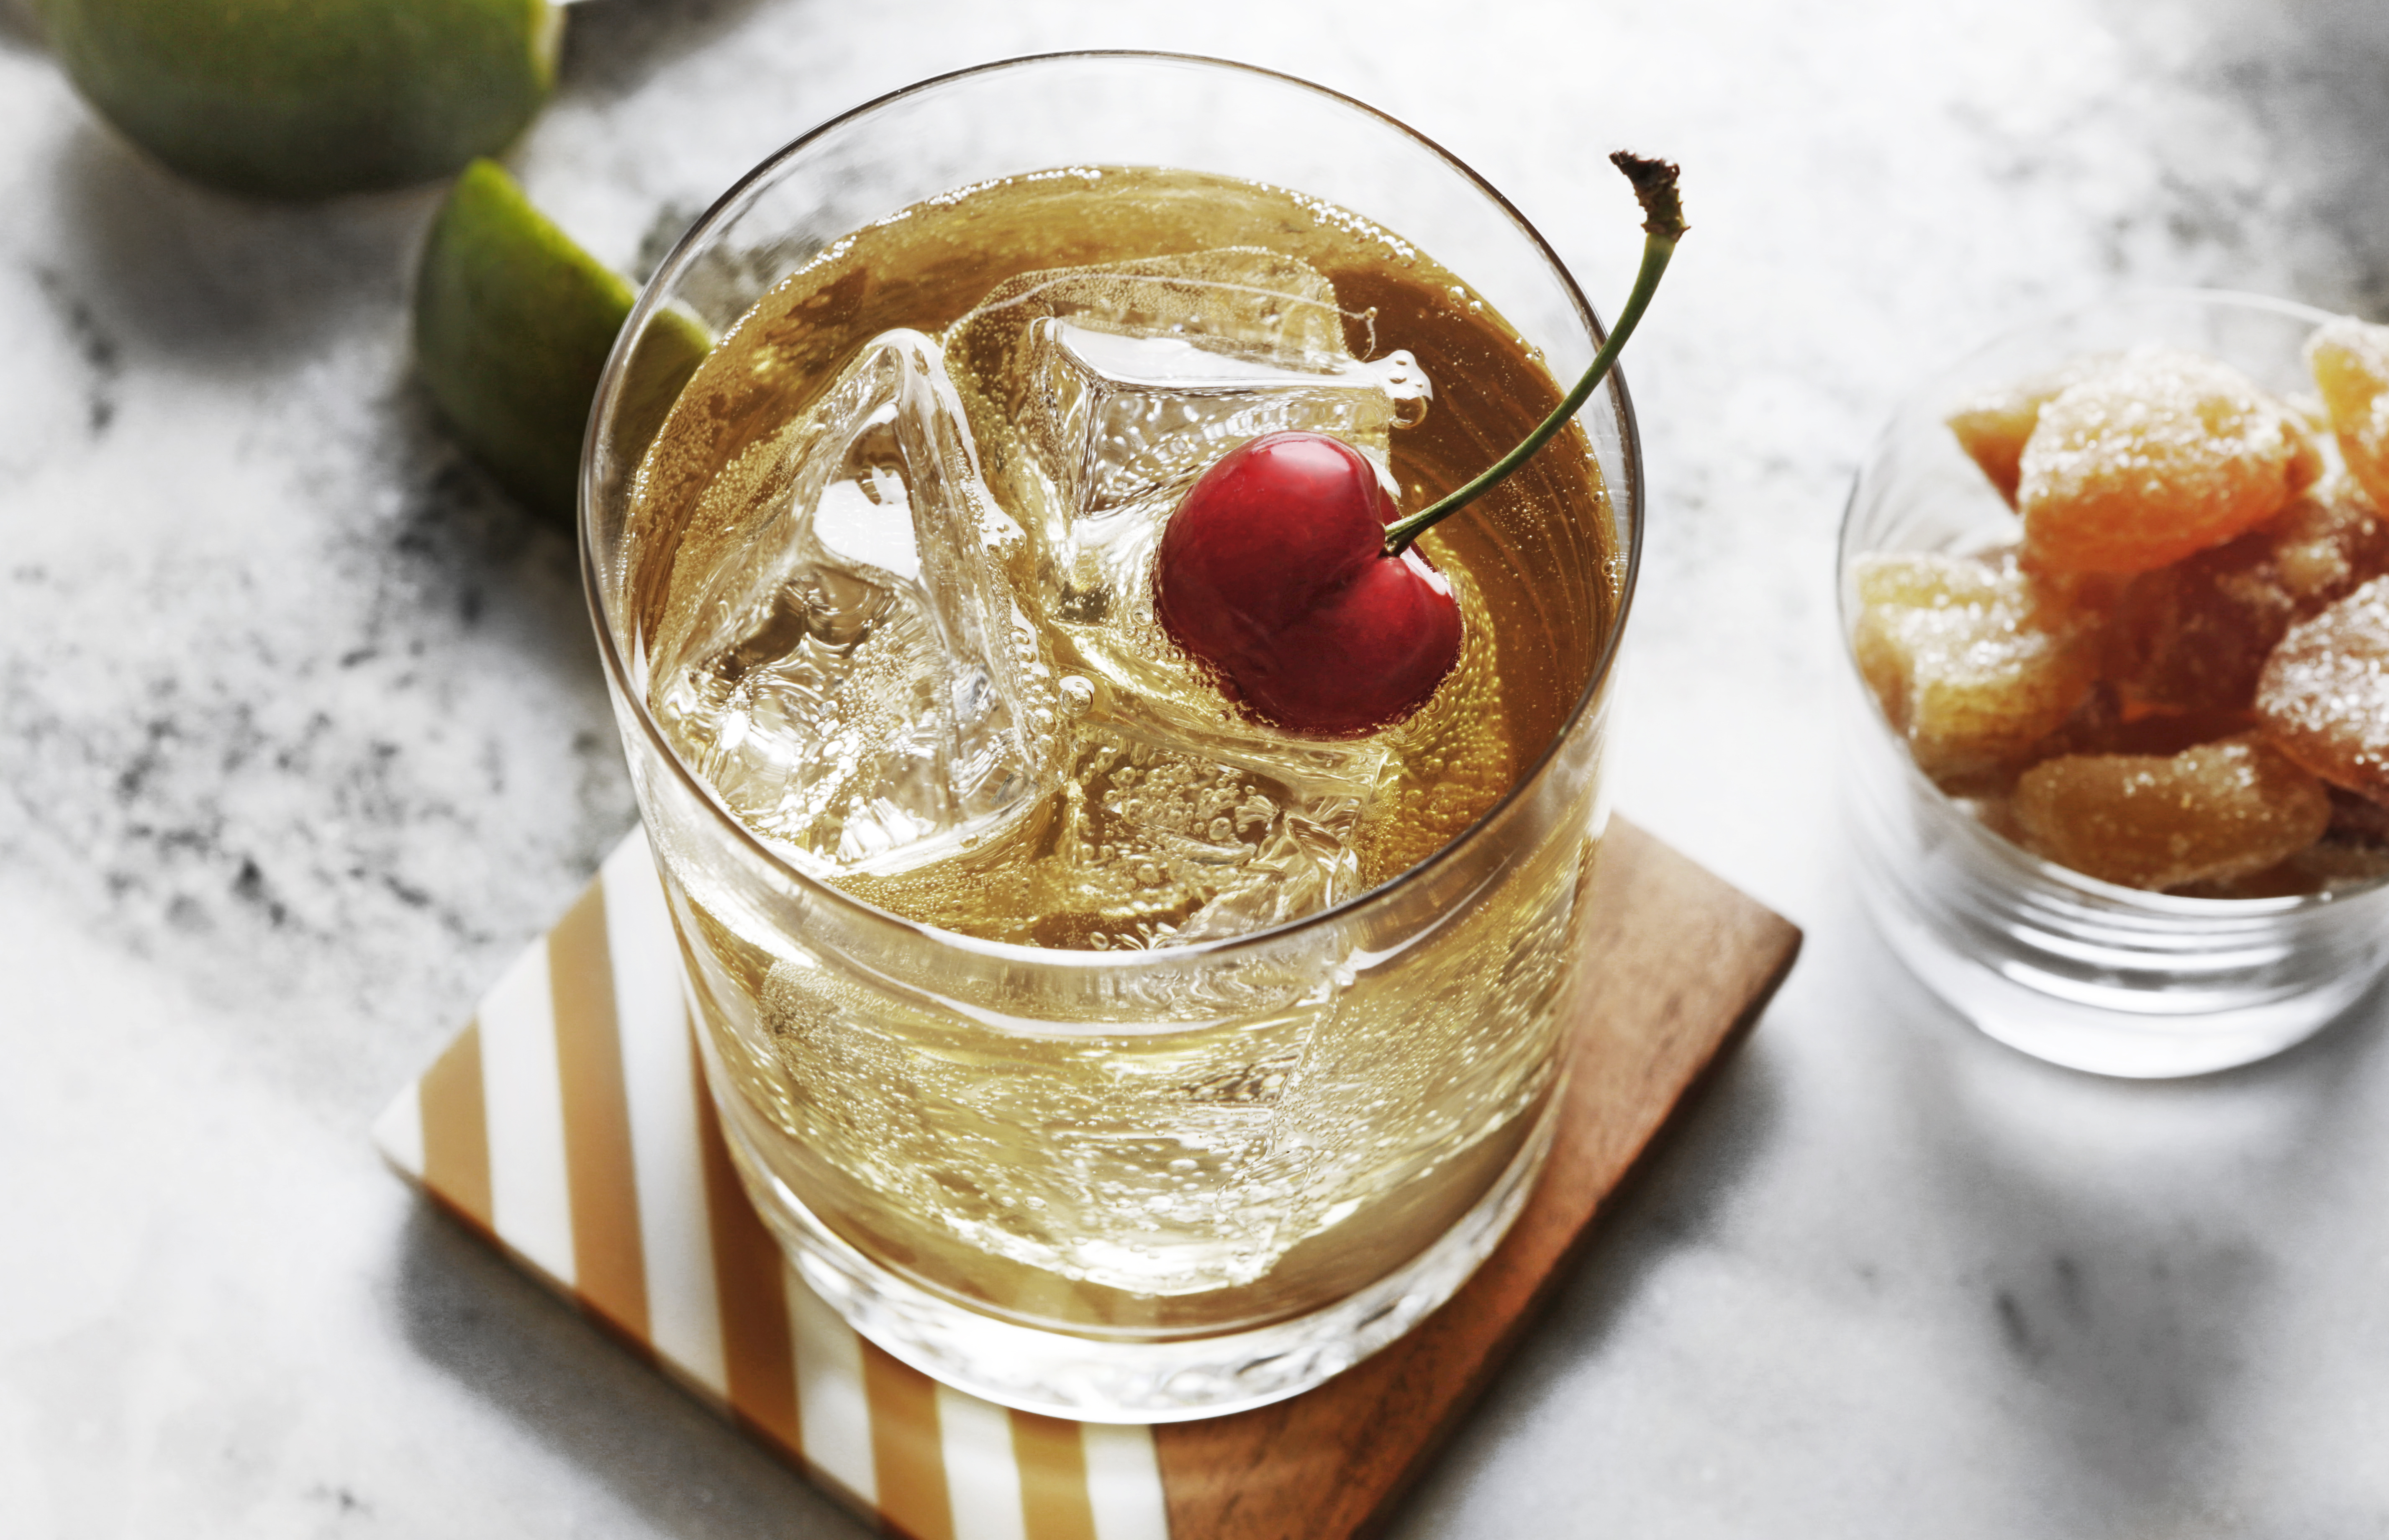 Pour vodka and ginger ale into a rocks glass filled with ice and stir briefly. Squeeze fresh lime juice on top. Garnish with a cherry.